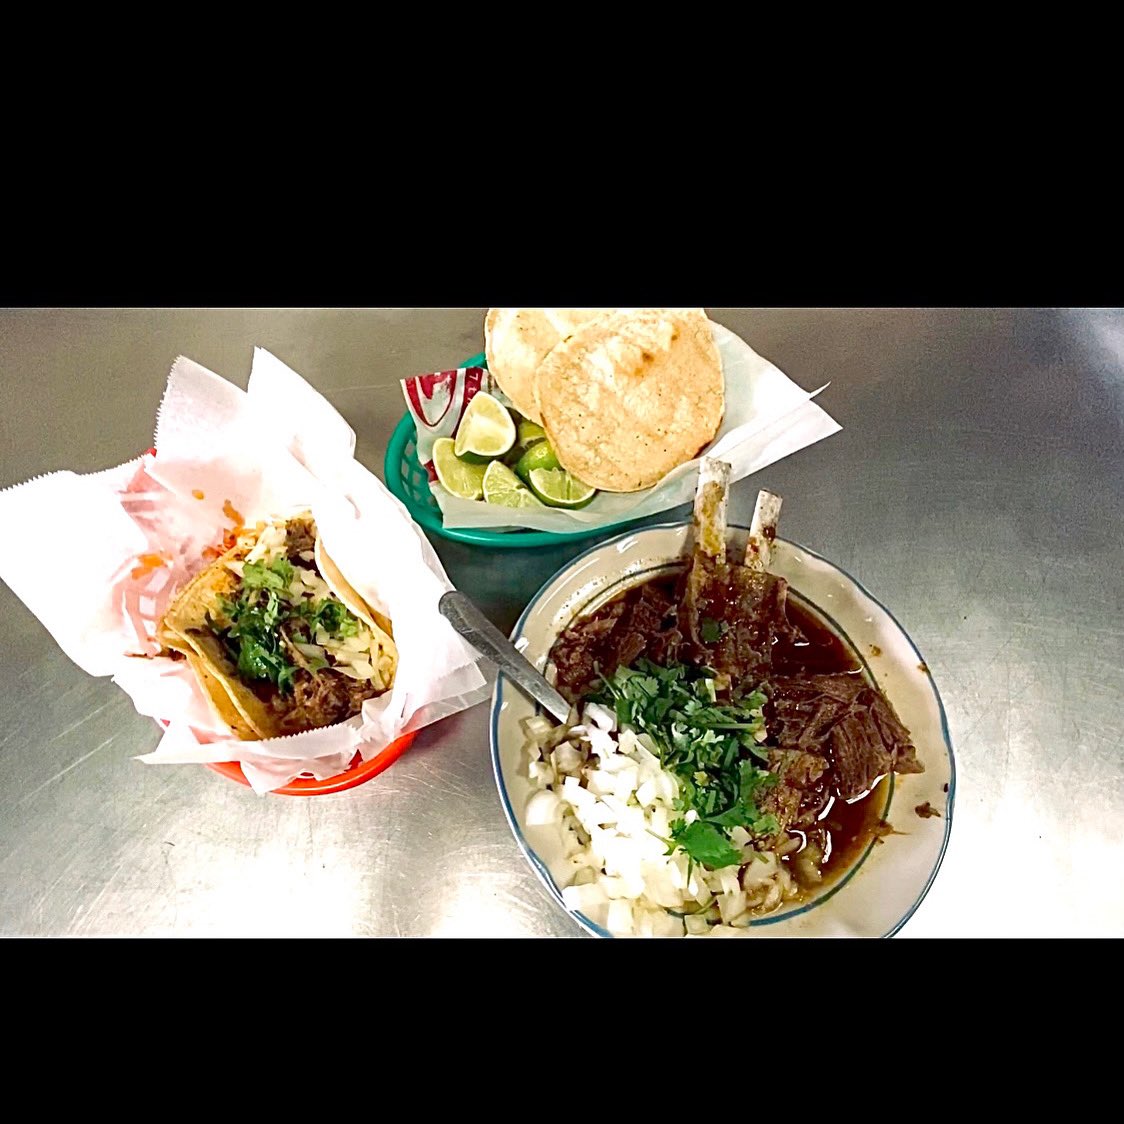 Light breakfast to start your Saturday. Birria = feel good currency, fill up your account. #feelgoodsaturday #birria #birriataco #birrieriaocotlan